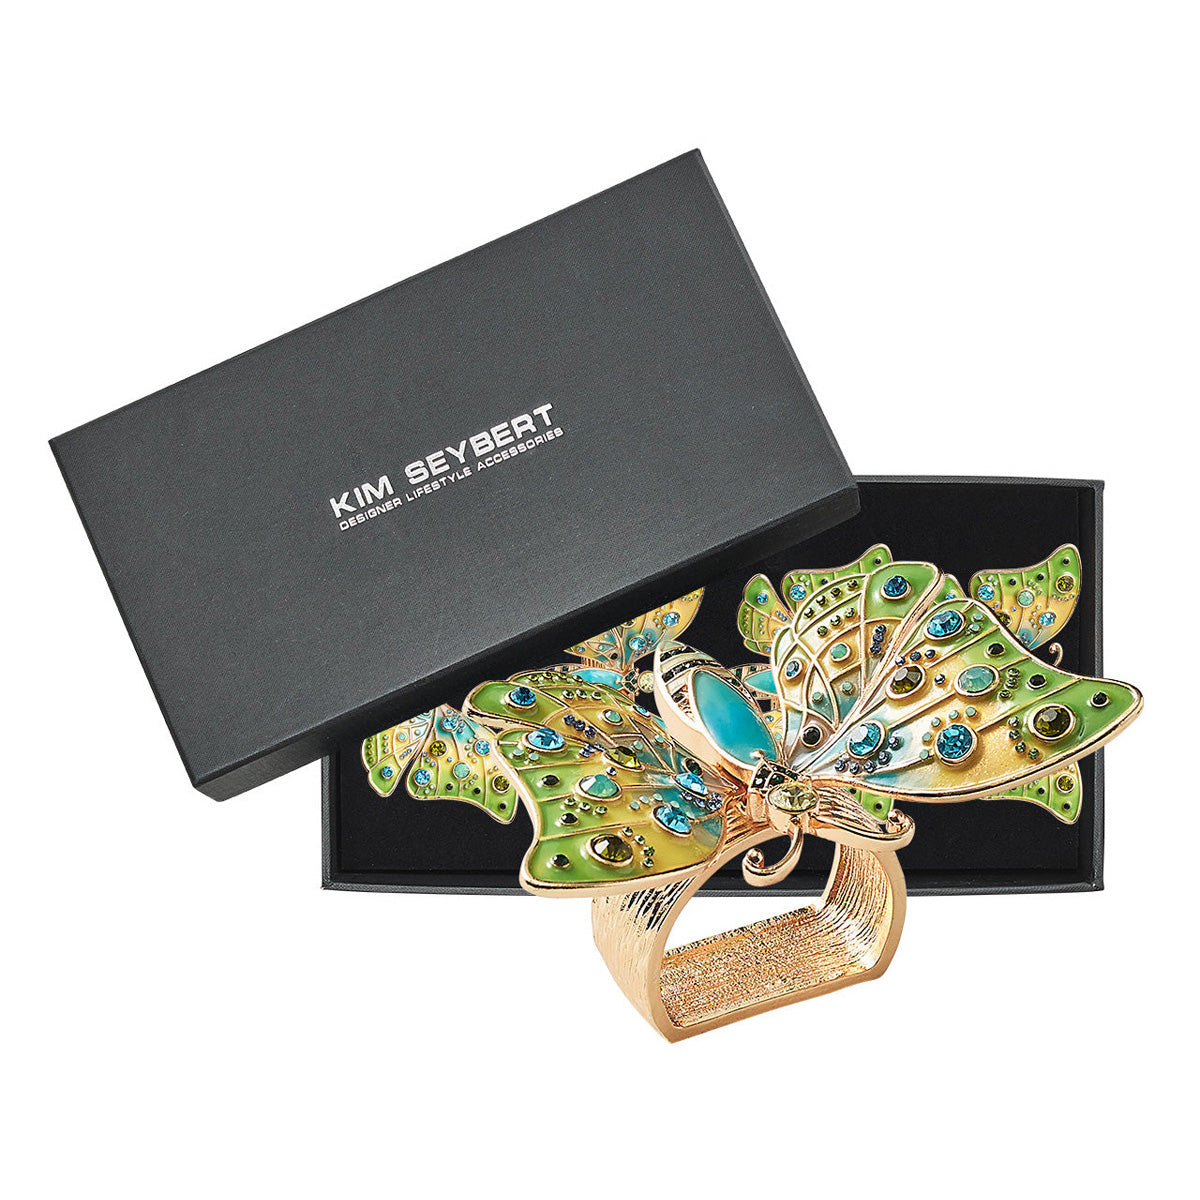 Arbor Napkin Ring in Blue & Green - Set of 4 in a Gift Box by Kim Seybert Additional Image-5